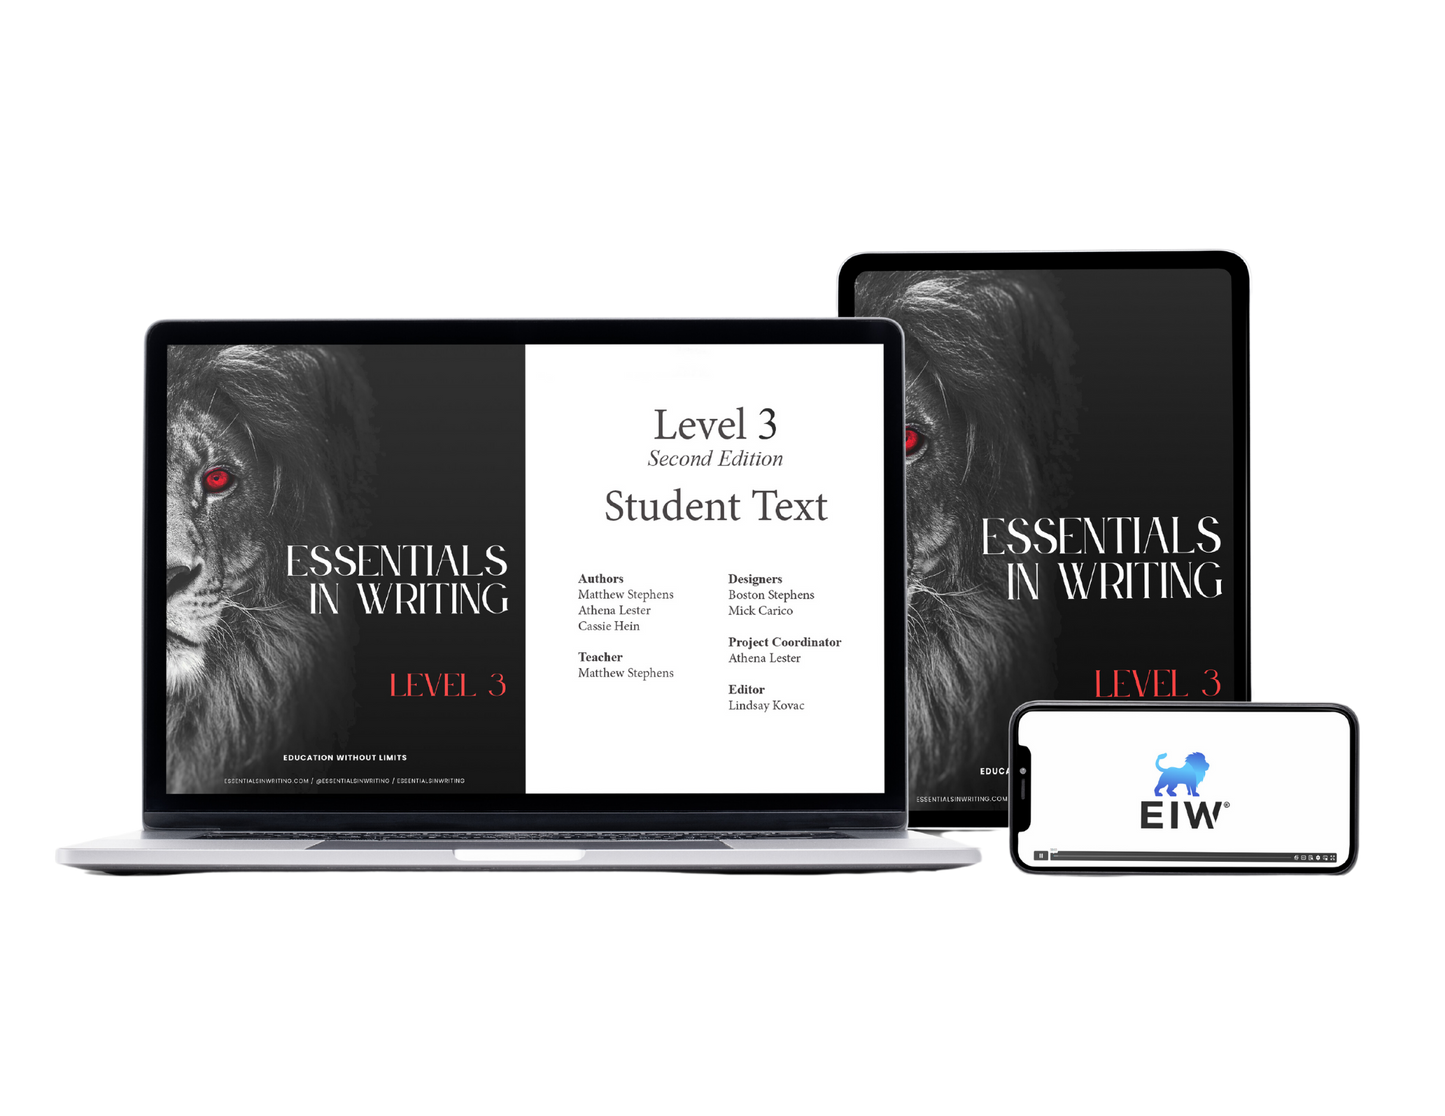 Essentials in Writing Level 3 Second Edition